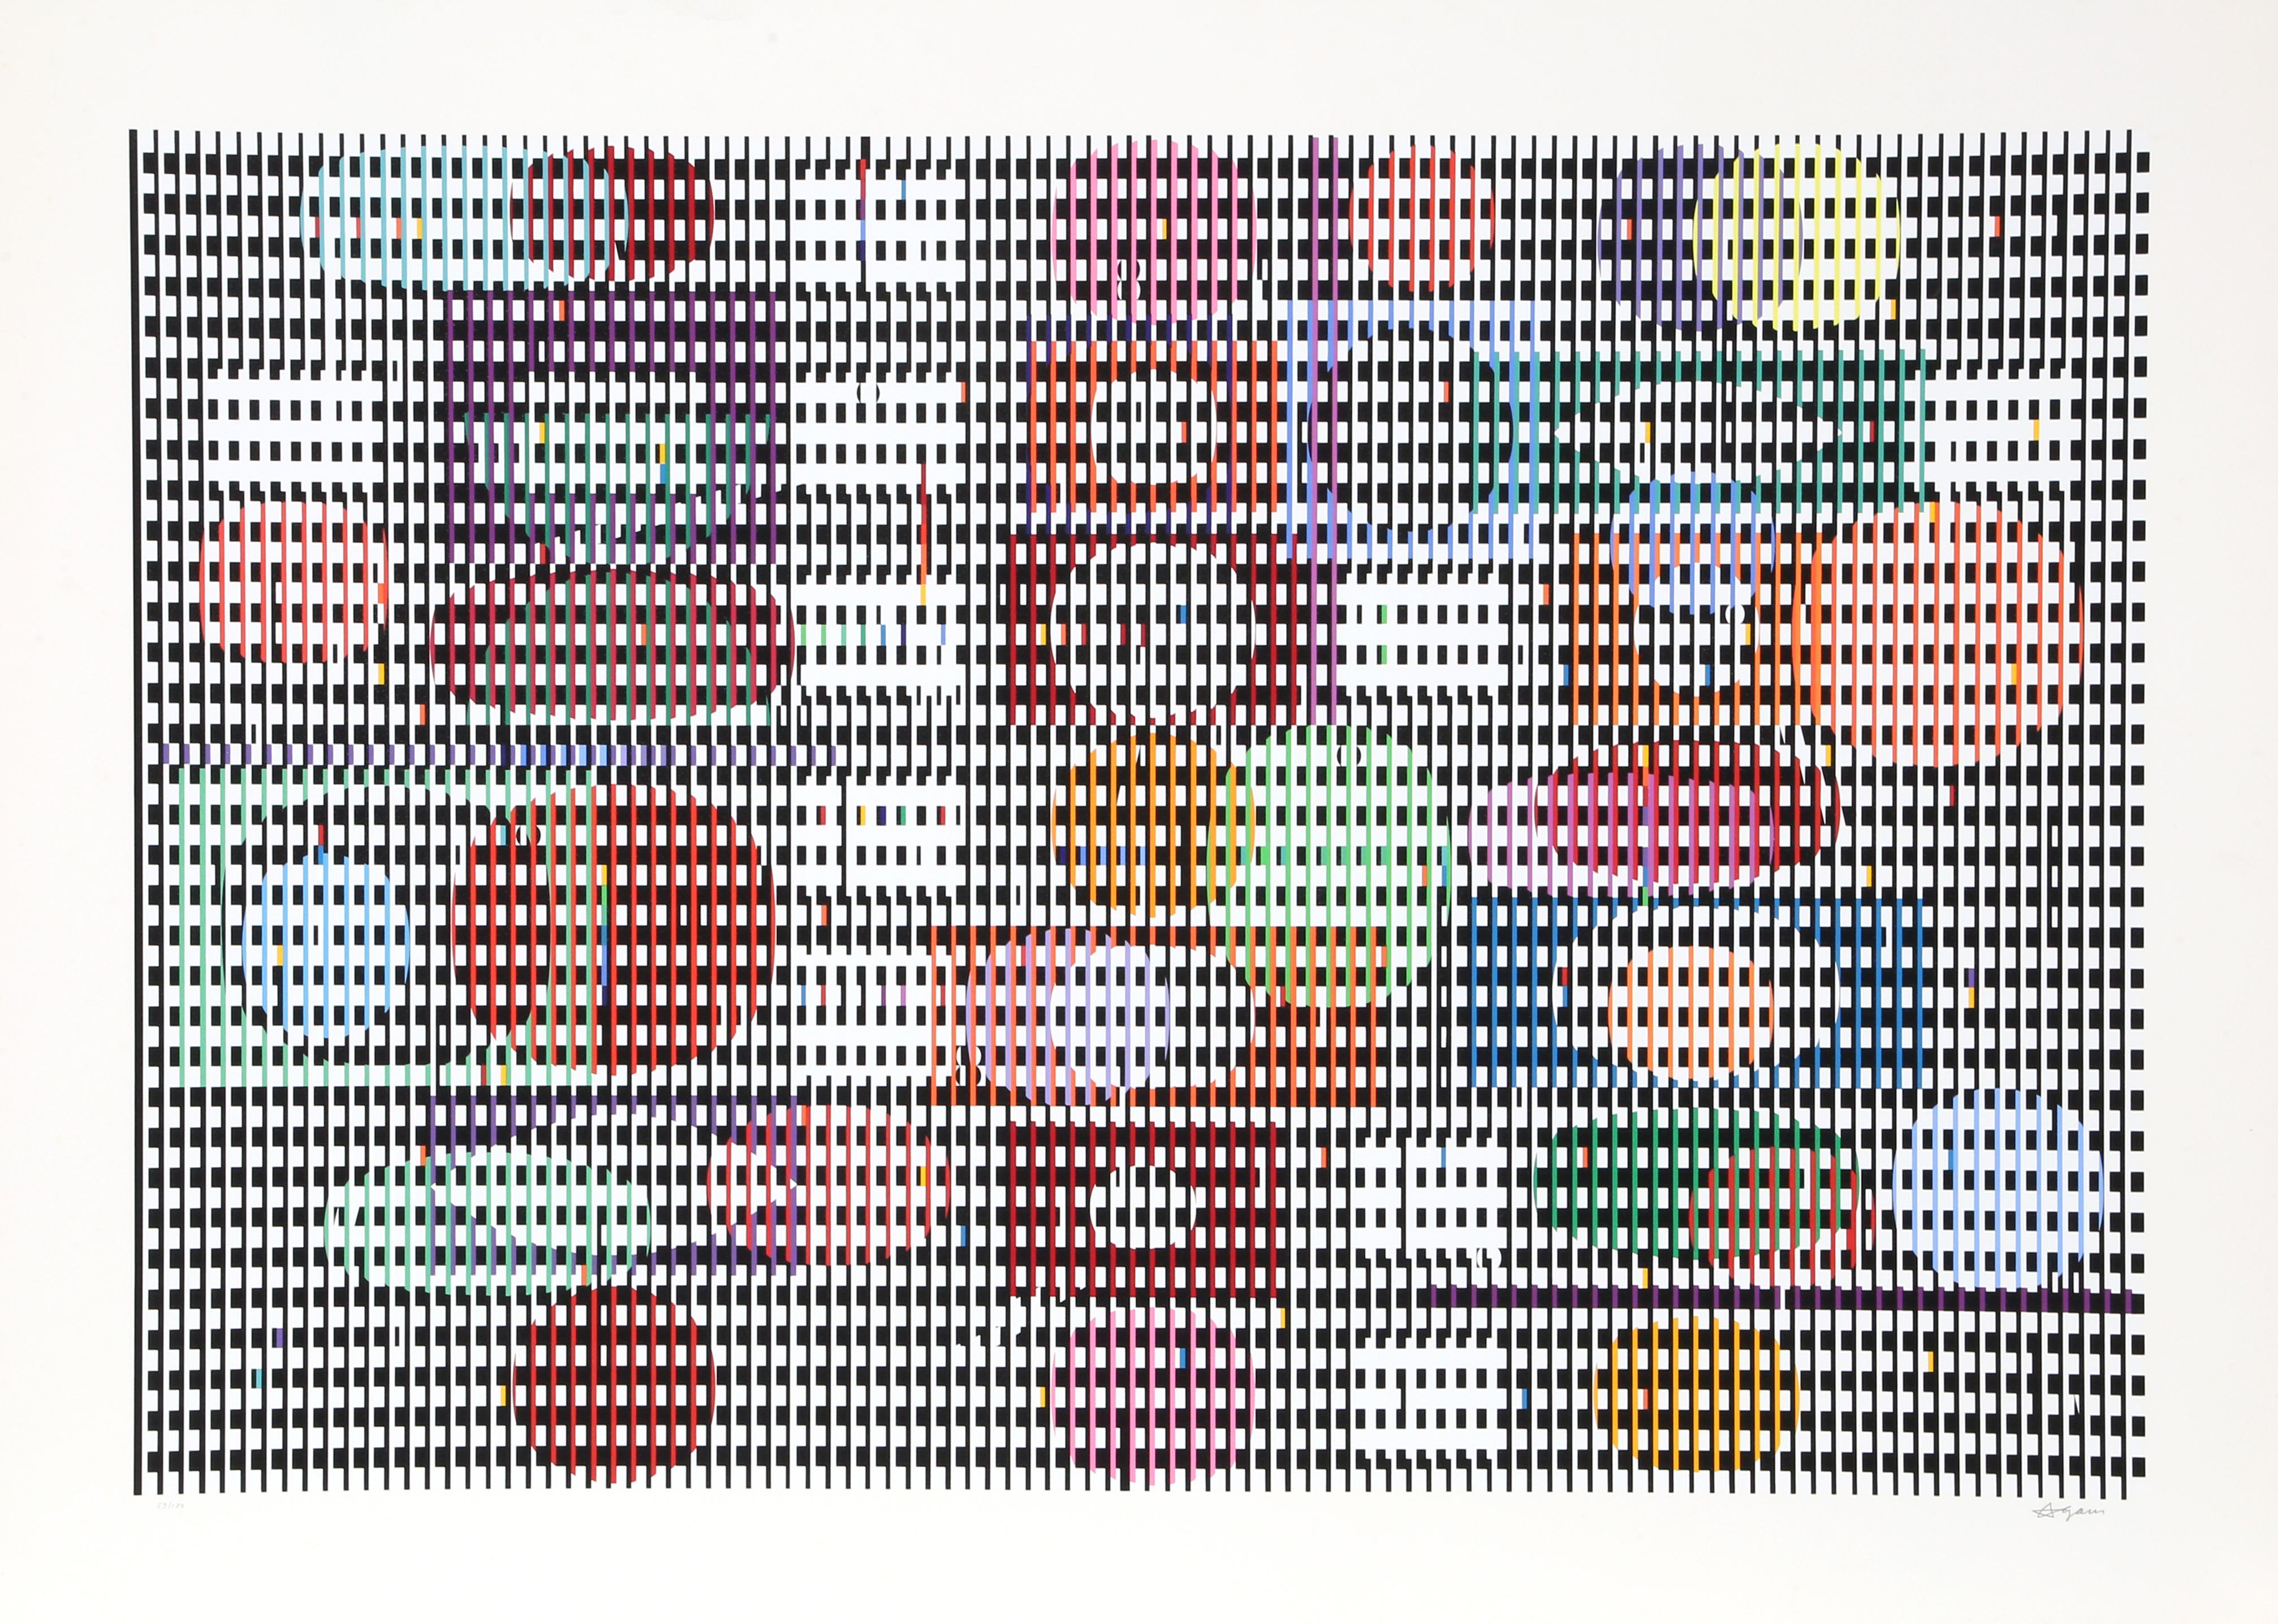 Artist: Yaacov Agam, Israeli (1928 - )
Title: I from Double Metamorphosis Series
Year: 1980
Medium: Screenprint on Arches, signed and numbered in pencil
Edition: 180
Image Size: 27.5 x 42 inches
Size: 35 x 49 in. (88.9 x 124.46 cm)
Frame: 37.5 x